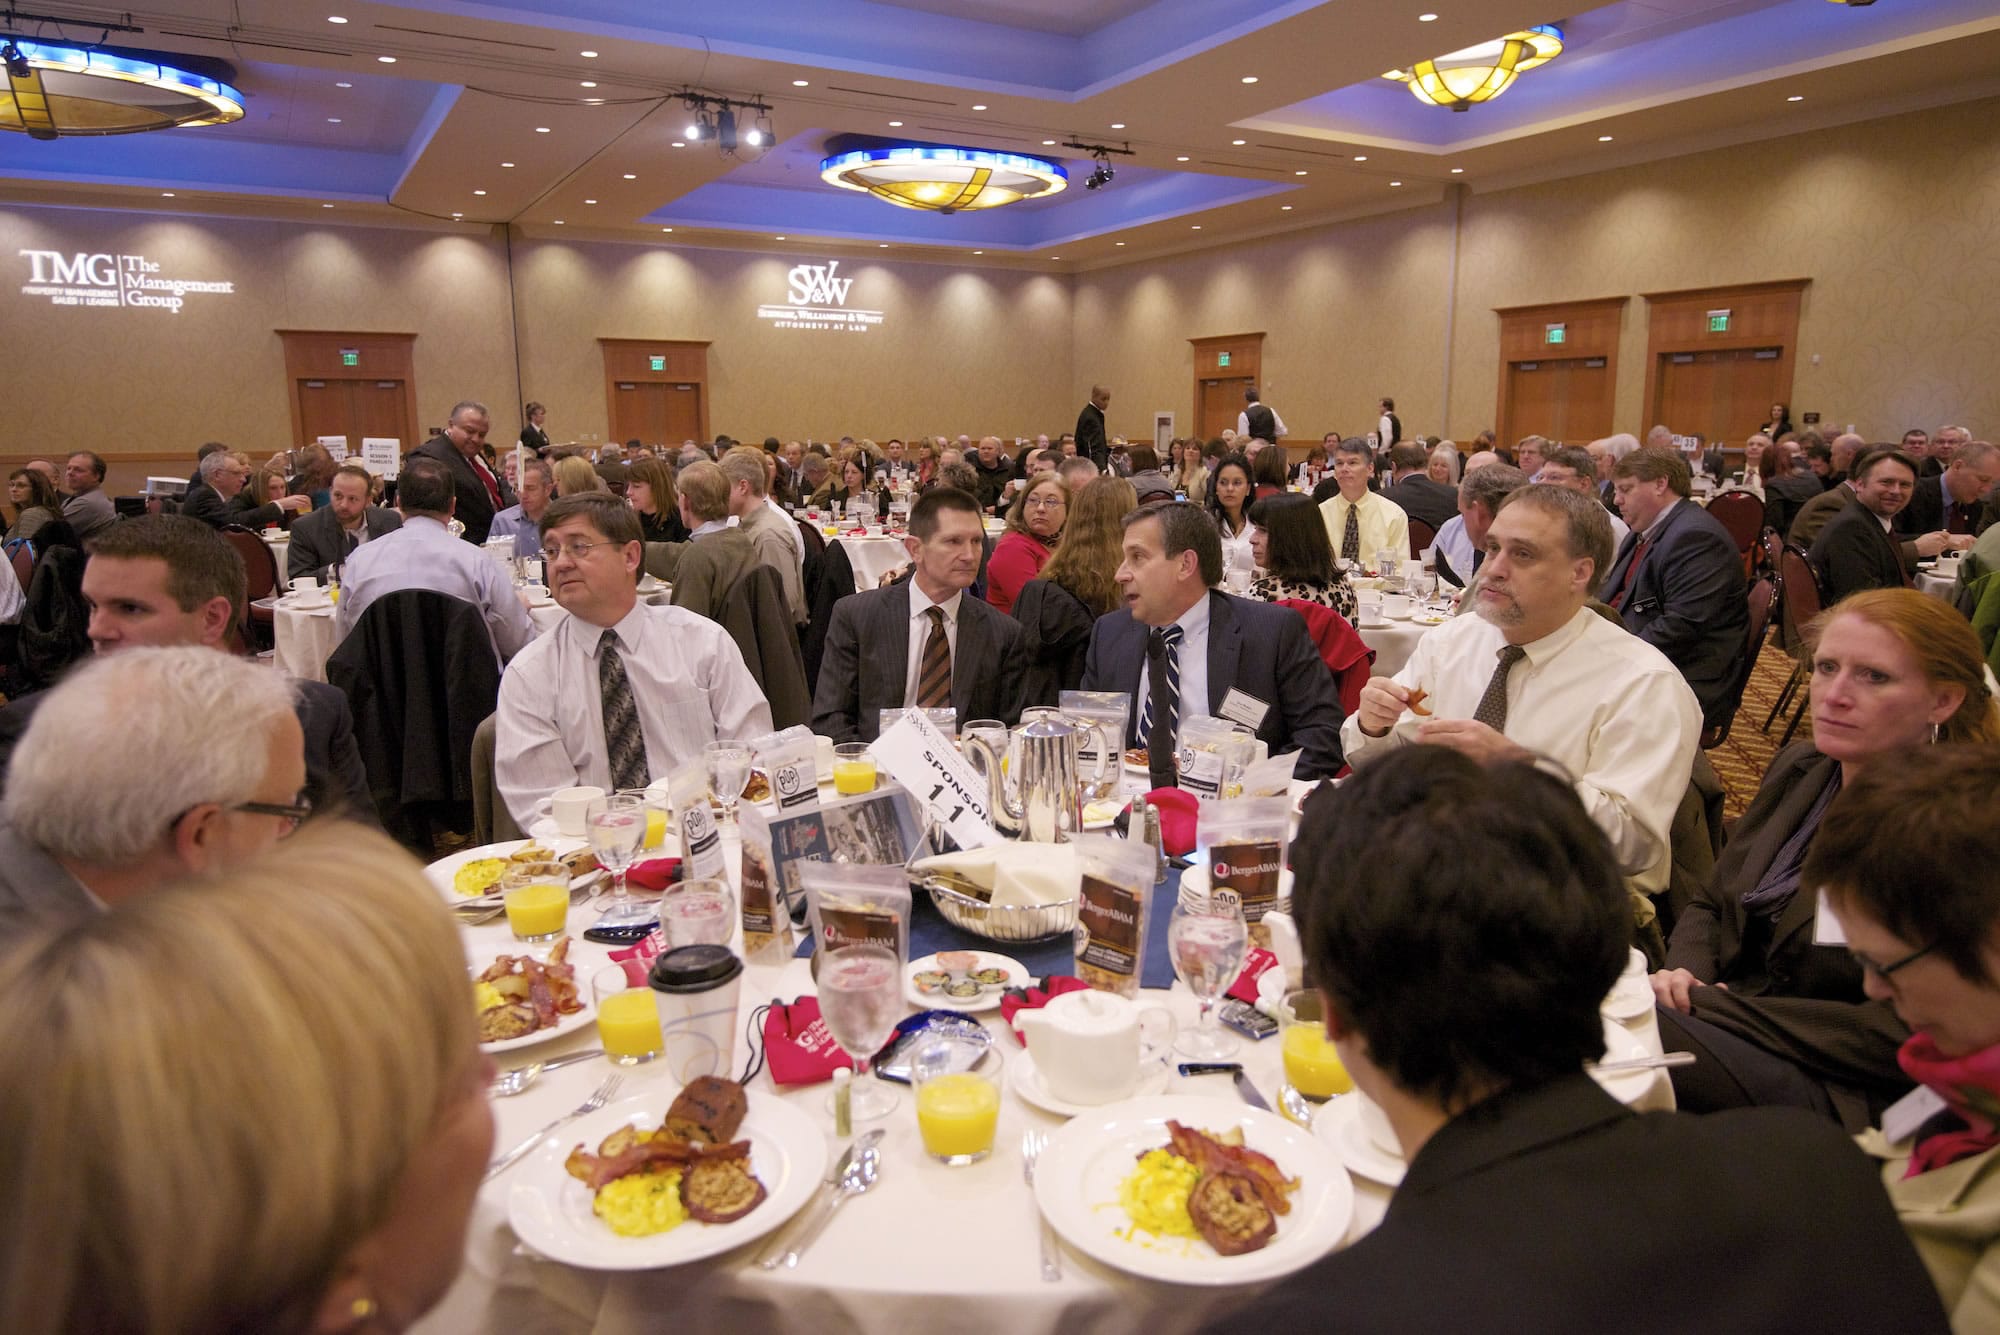 Participants talk and enjoy breakfast before the start of the 2013 Economic Forecast Breakfast this morning.